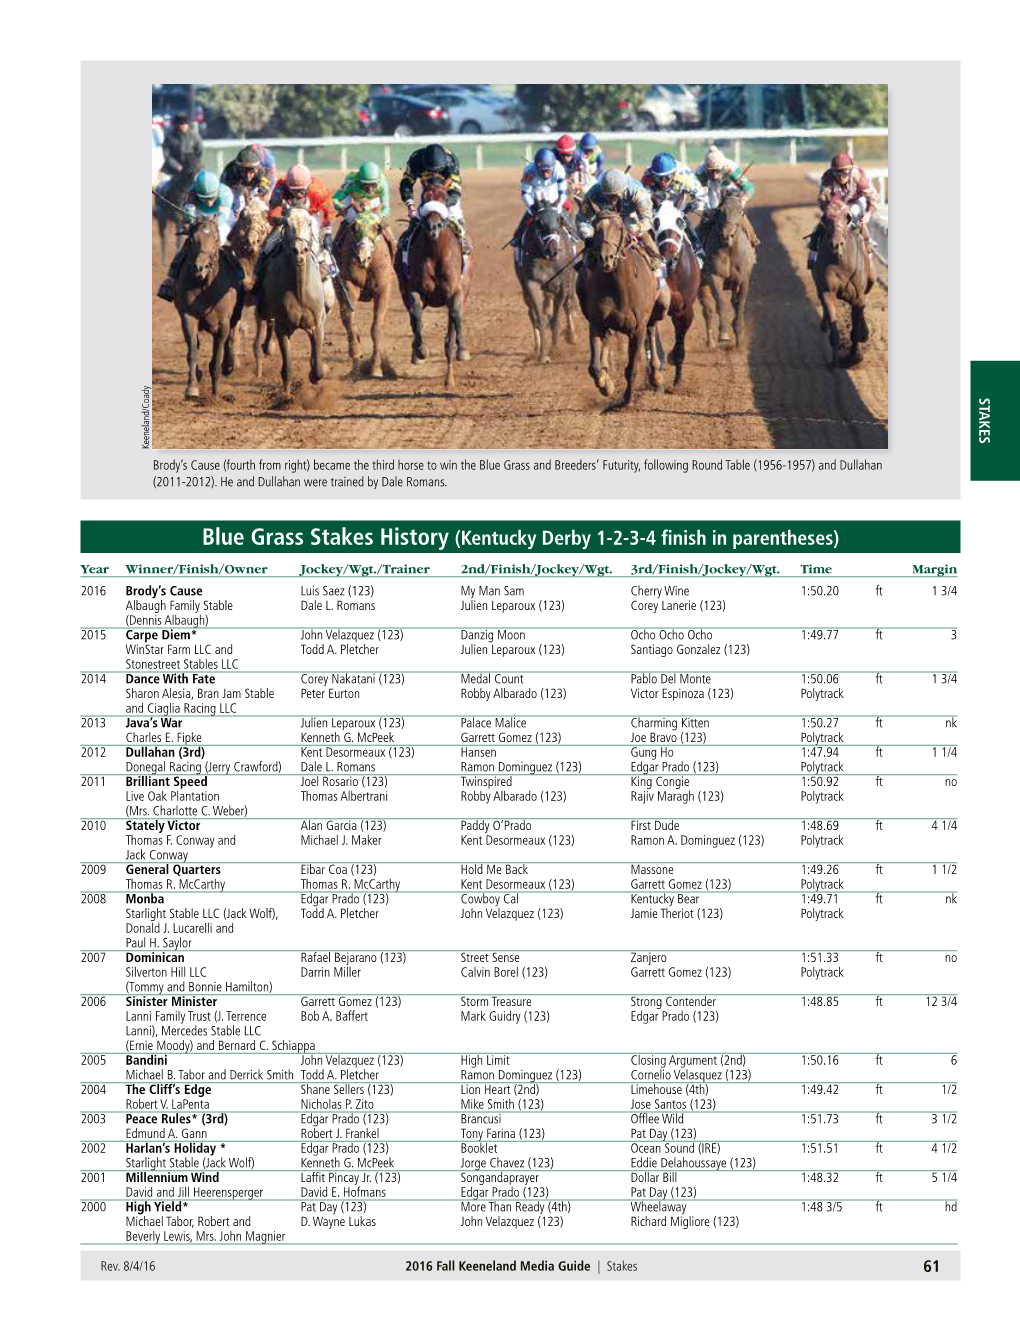 Blue Grass Stakes History (Kentucky Derby 1-2-3-4 Finish in Parentheses) Year Winner/Finish/Owner Jockey/Wgt./Trainer 2Nd/Finish/Jockey/Wgt